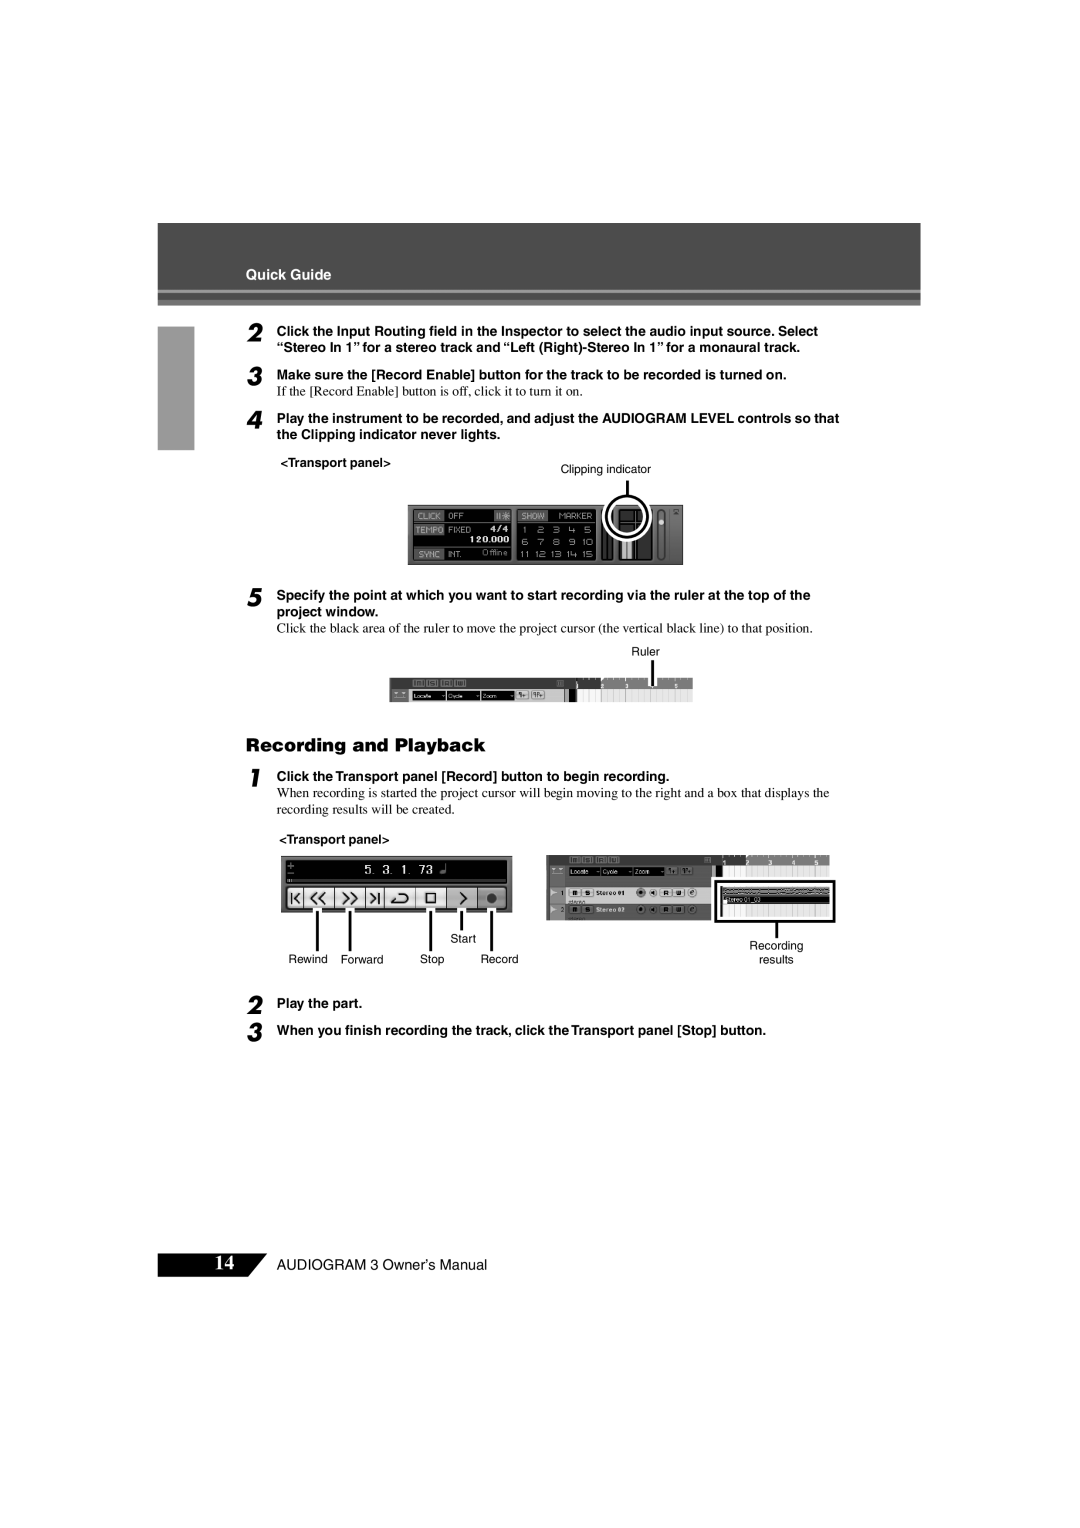 Yamaha Audiogram 3 owner manual Recording and Playback, Quick Guide 